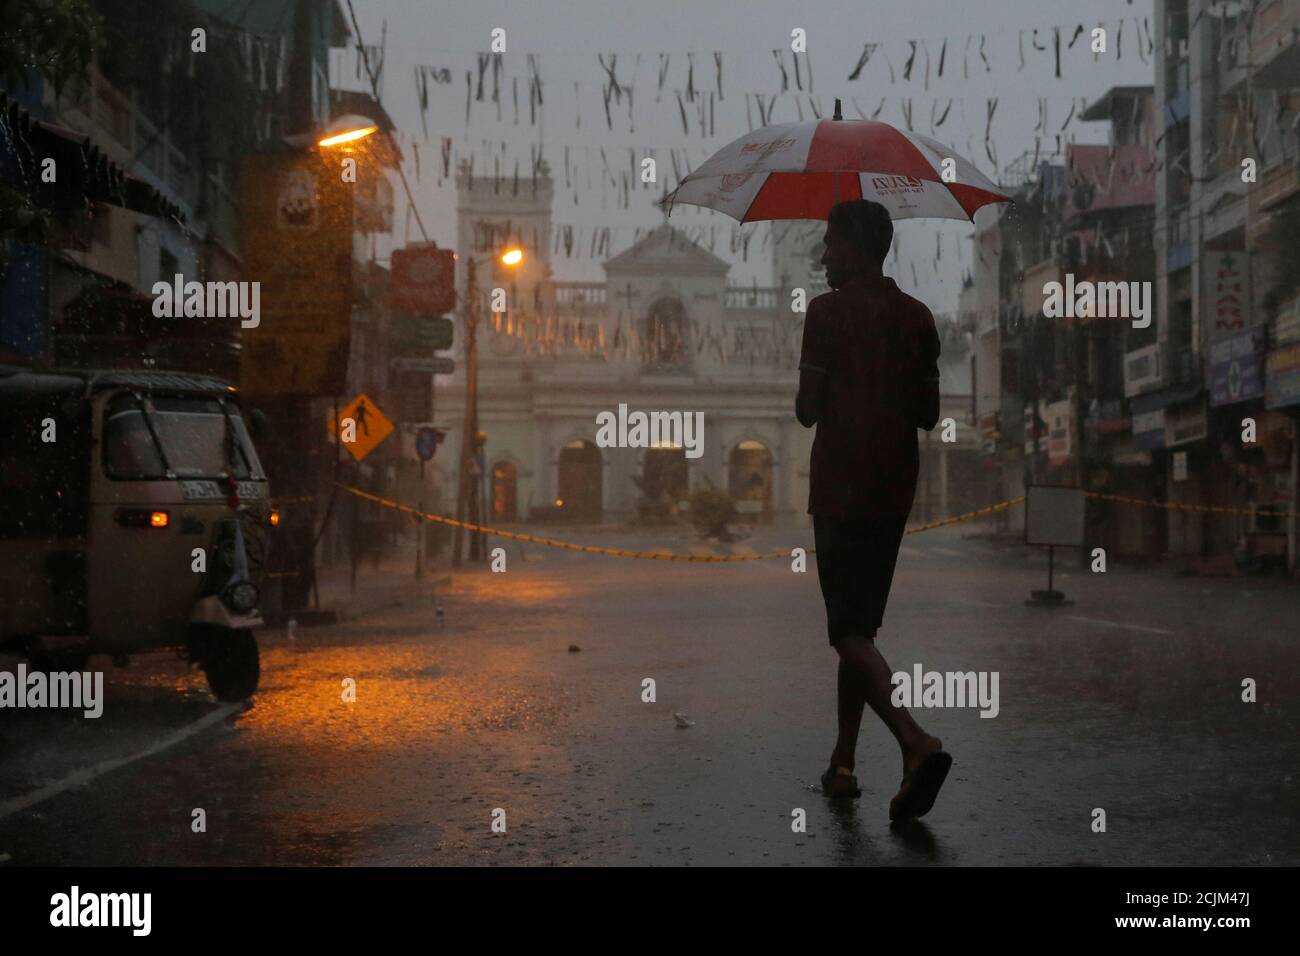 A man crosses a street during heavy rain near the security cordon surrounding St. Anthony's Shrine, days after a string of suicide bomb attacks on churches and luxury hotels across the island on Easter Sunday, in Colombo, Sri Lanka April 25, 2019. REUTERS/Thomas Peter Stock Photo